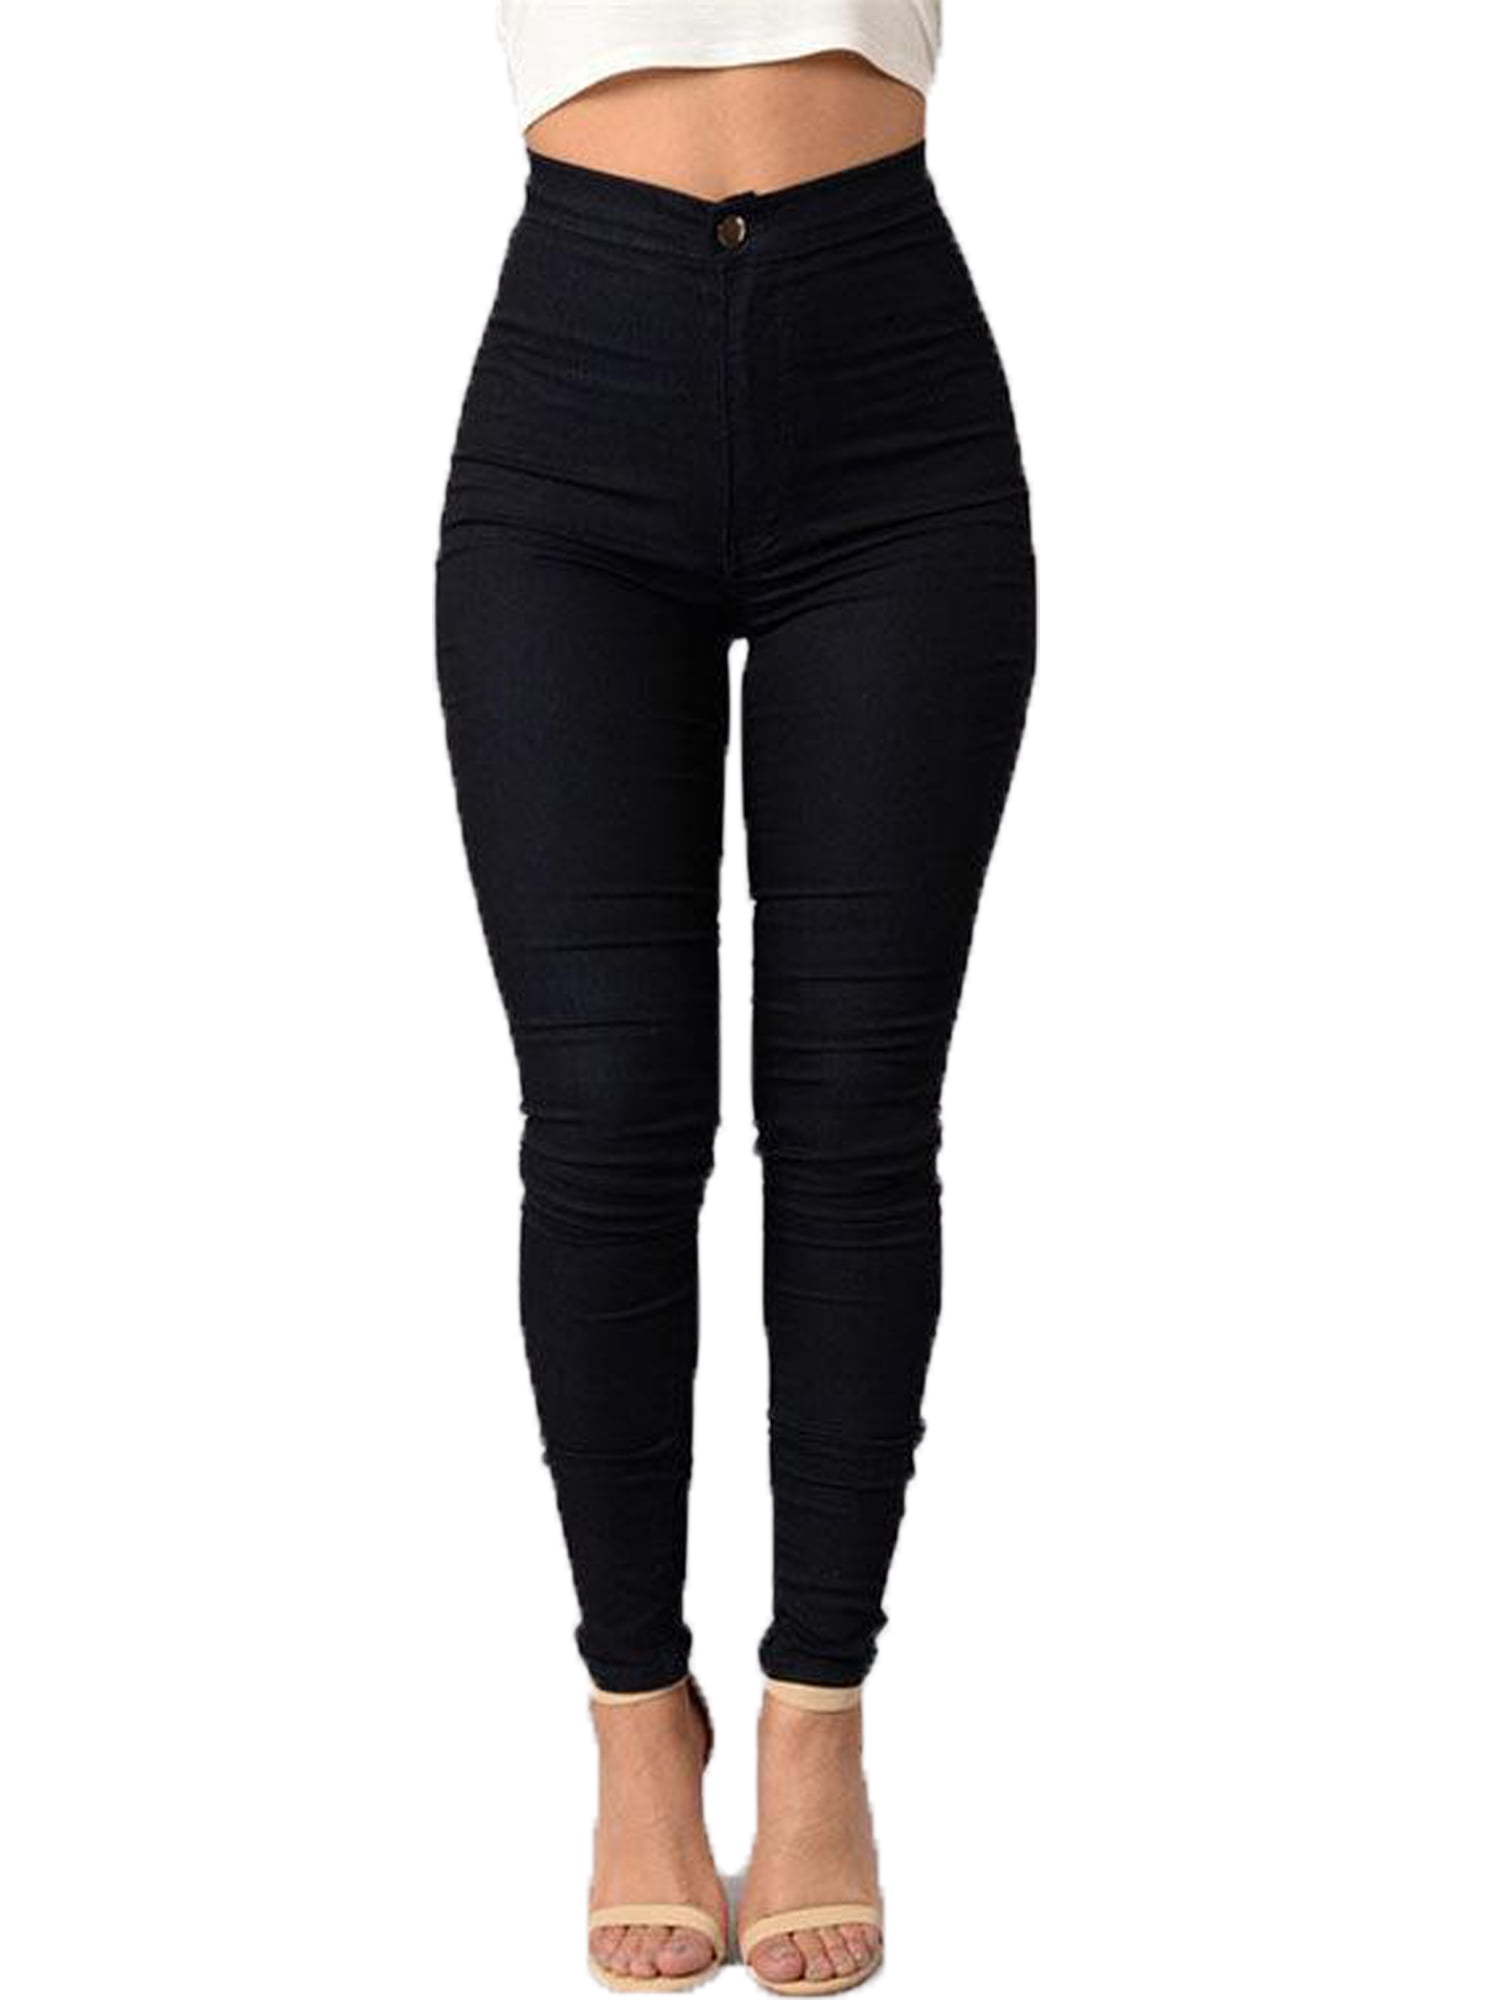 ladies black high waisted jeans